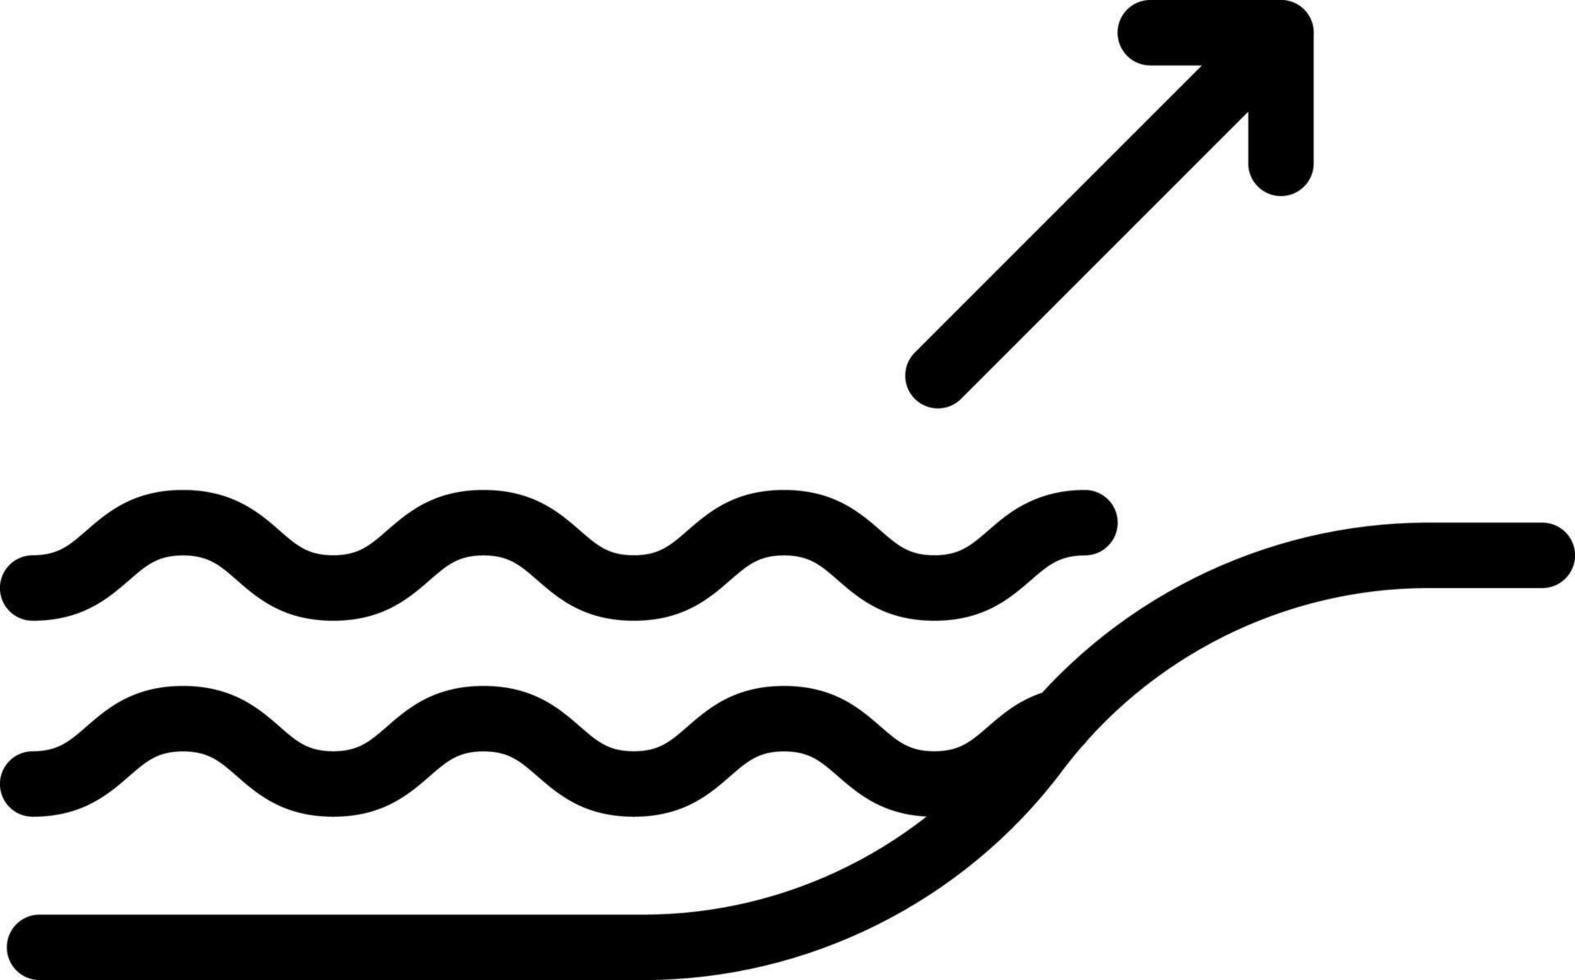 water flow vector illustration on a background.Premium quality symbols.vector icons for concept and graphic design.